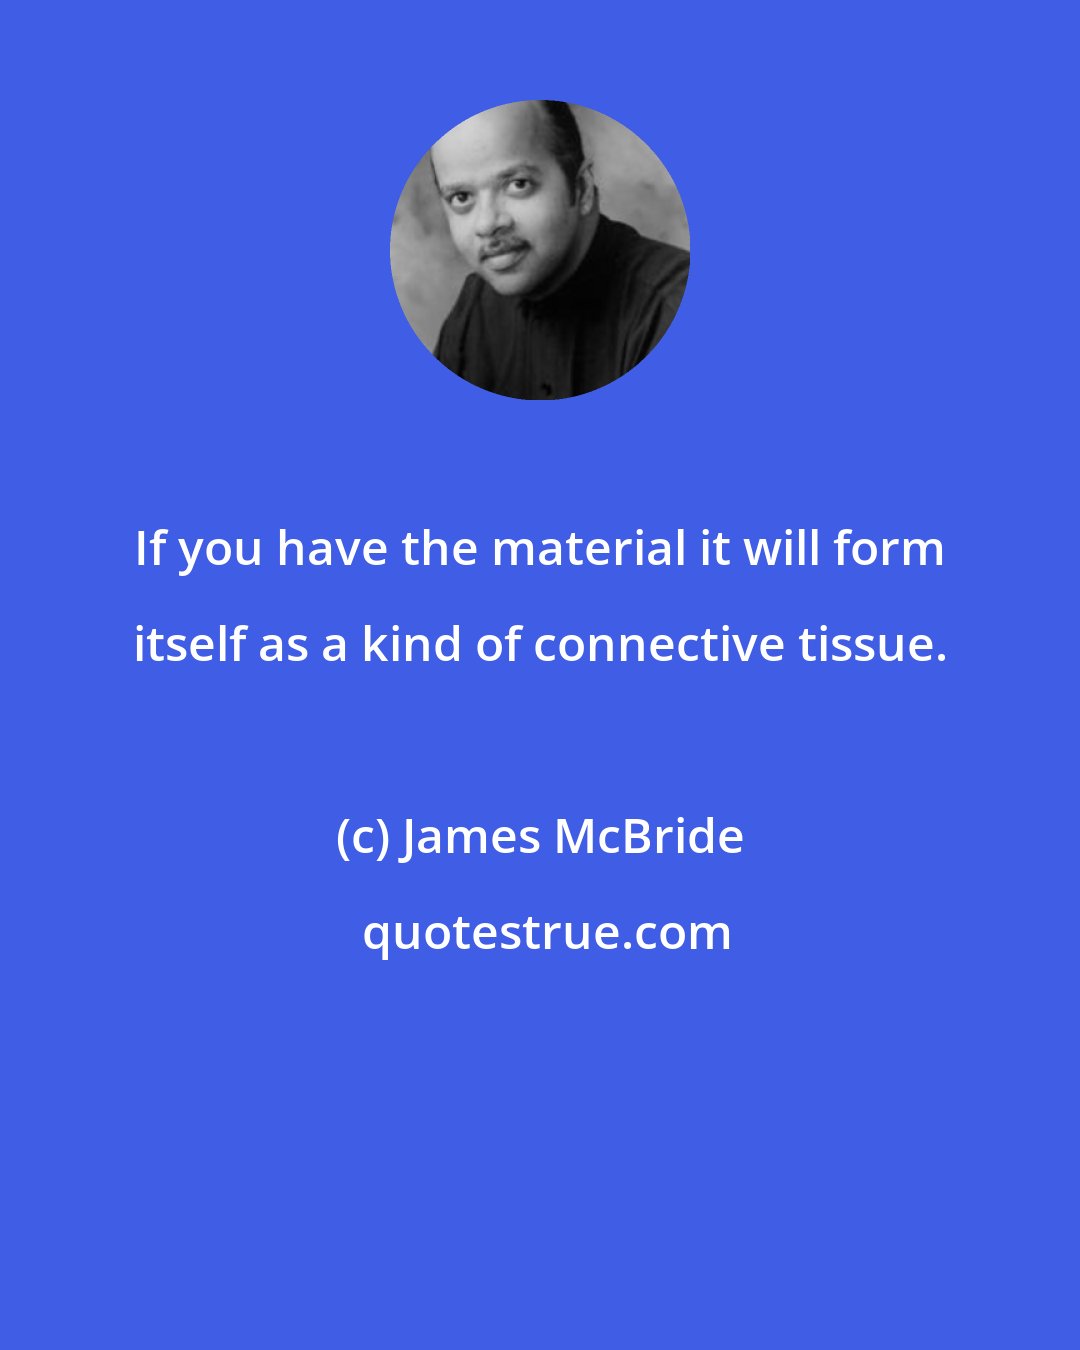 James McBride: If you have the material it will form itself as a kind of connective tissue.